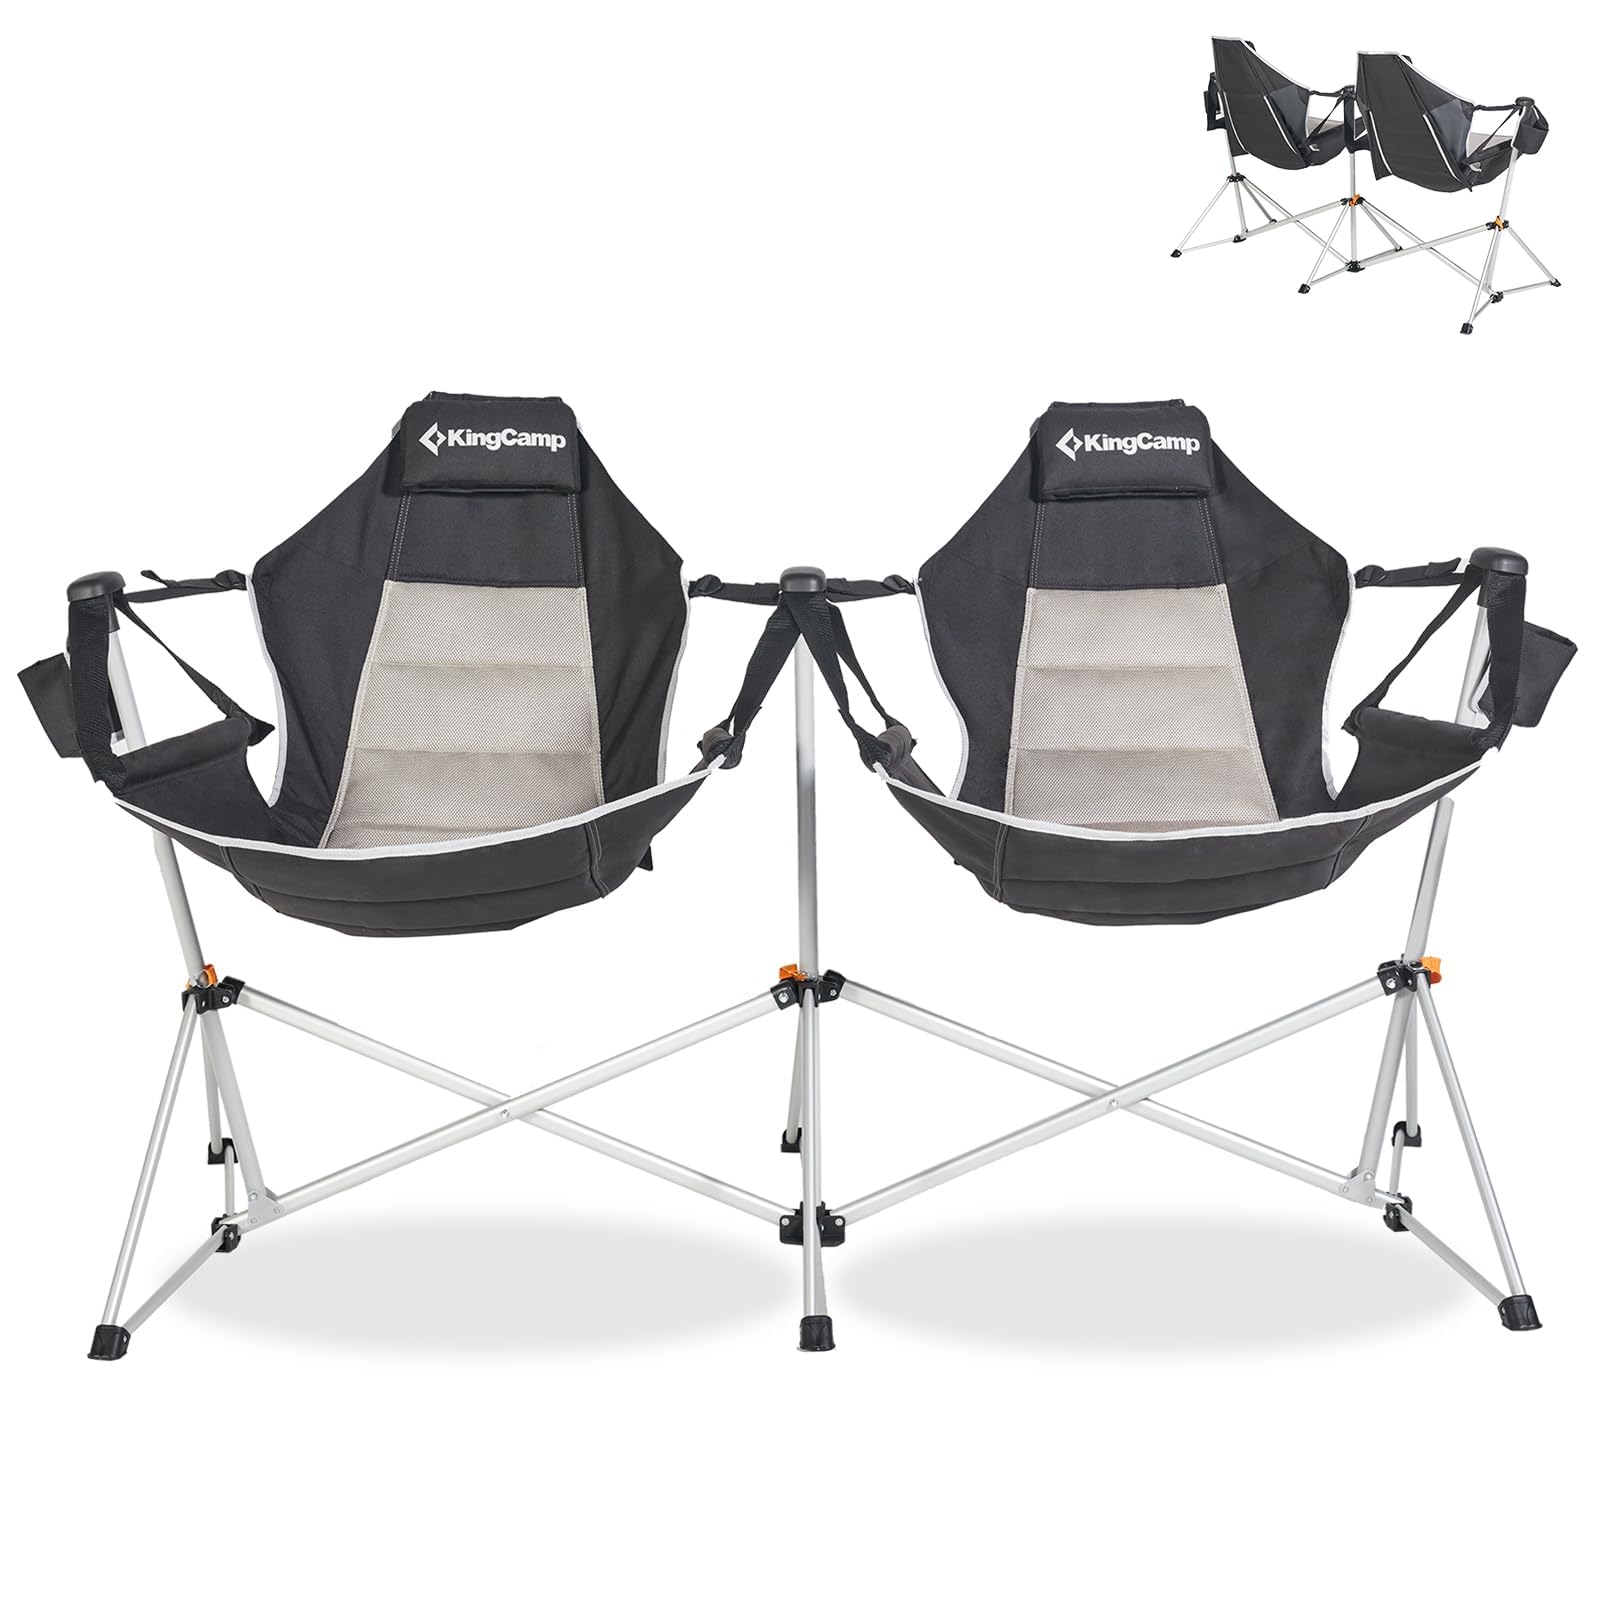 SUPER DEAL: KingCamp ORCHID C30 Heavy Duty Oversize Double Hammock Camping Chairs